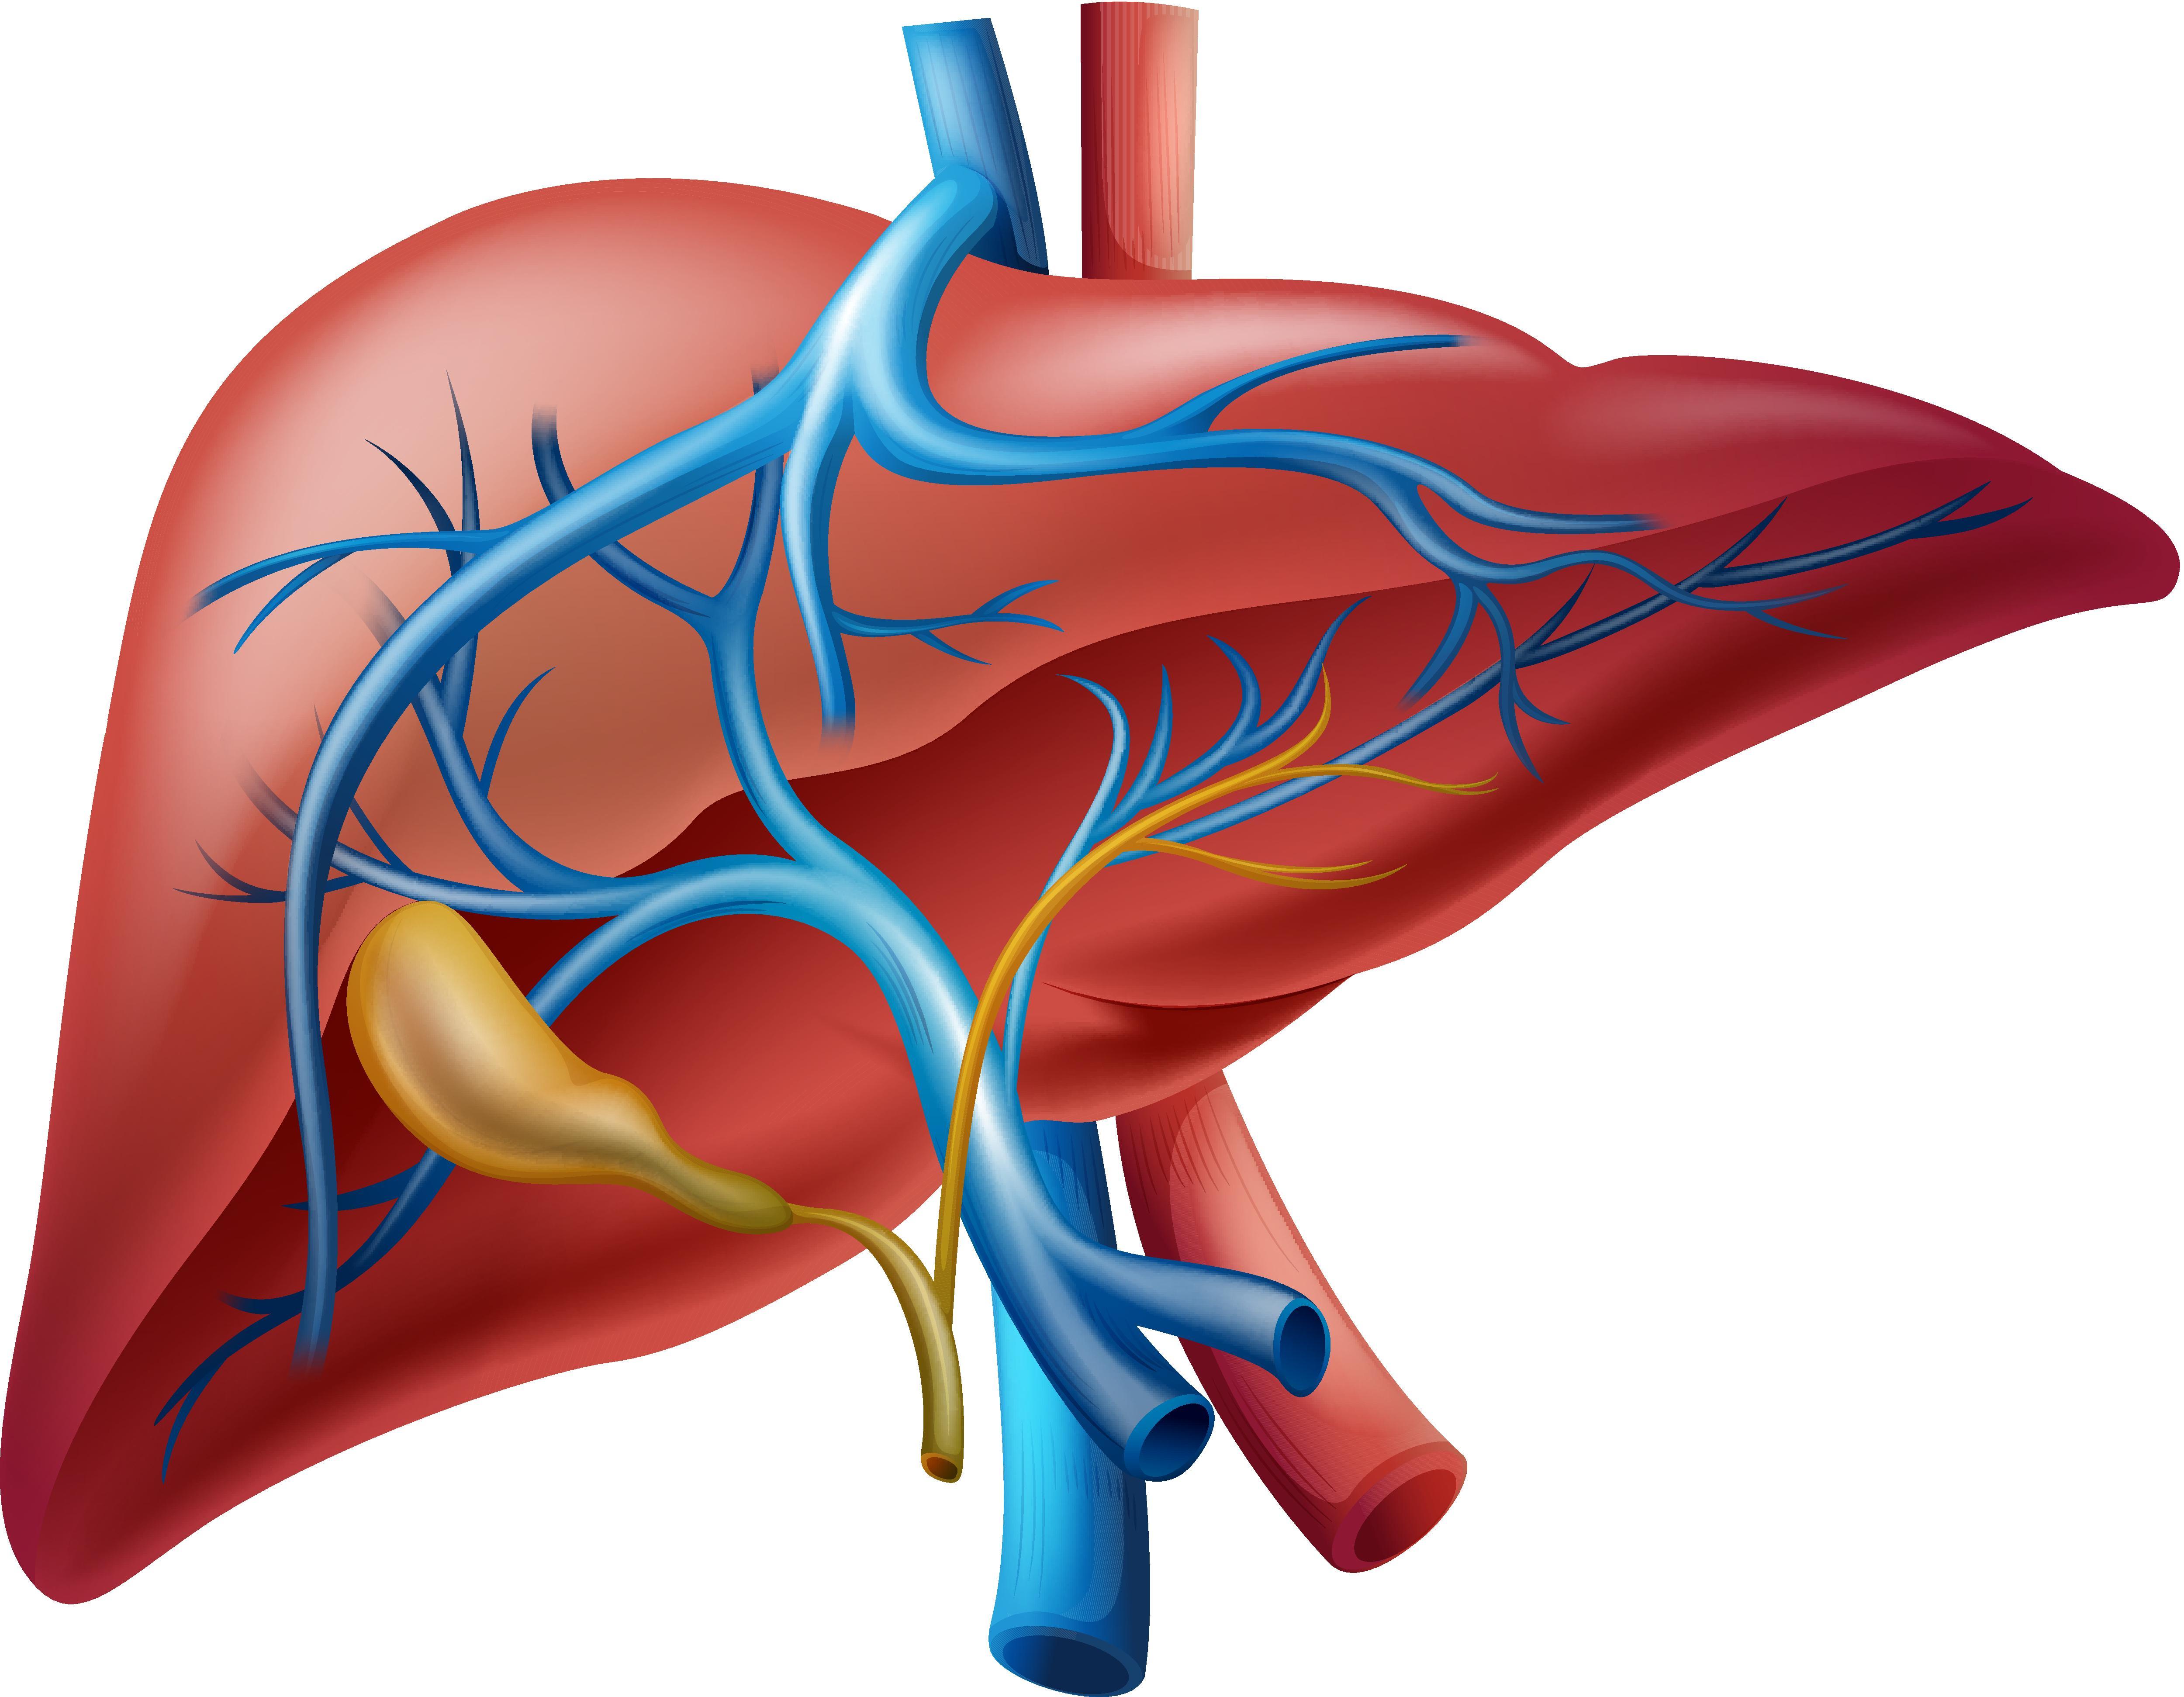 Hepatobiliary Surgery and Nutrition：使用机器学习策略预测和验证肝内<font color="red">胆管</font>癌的预后甲基化评分